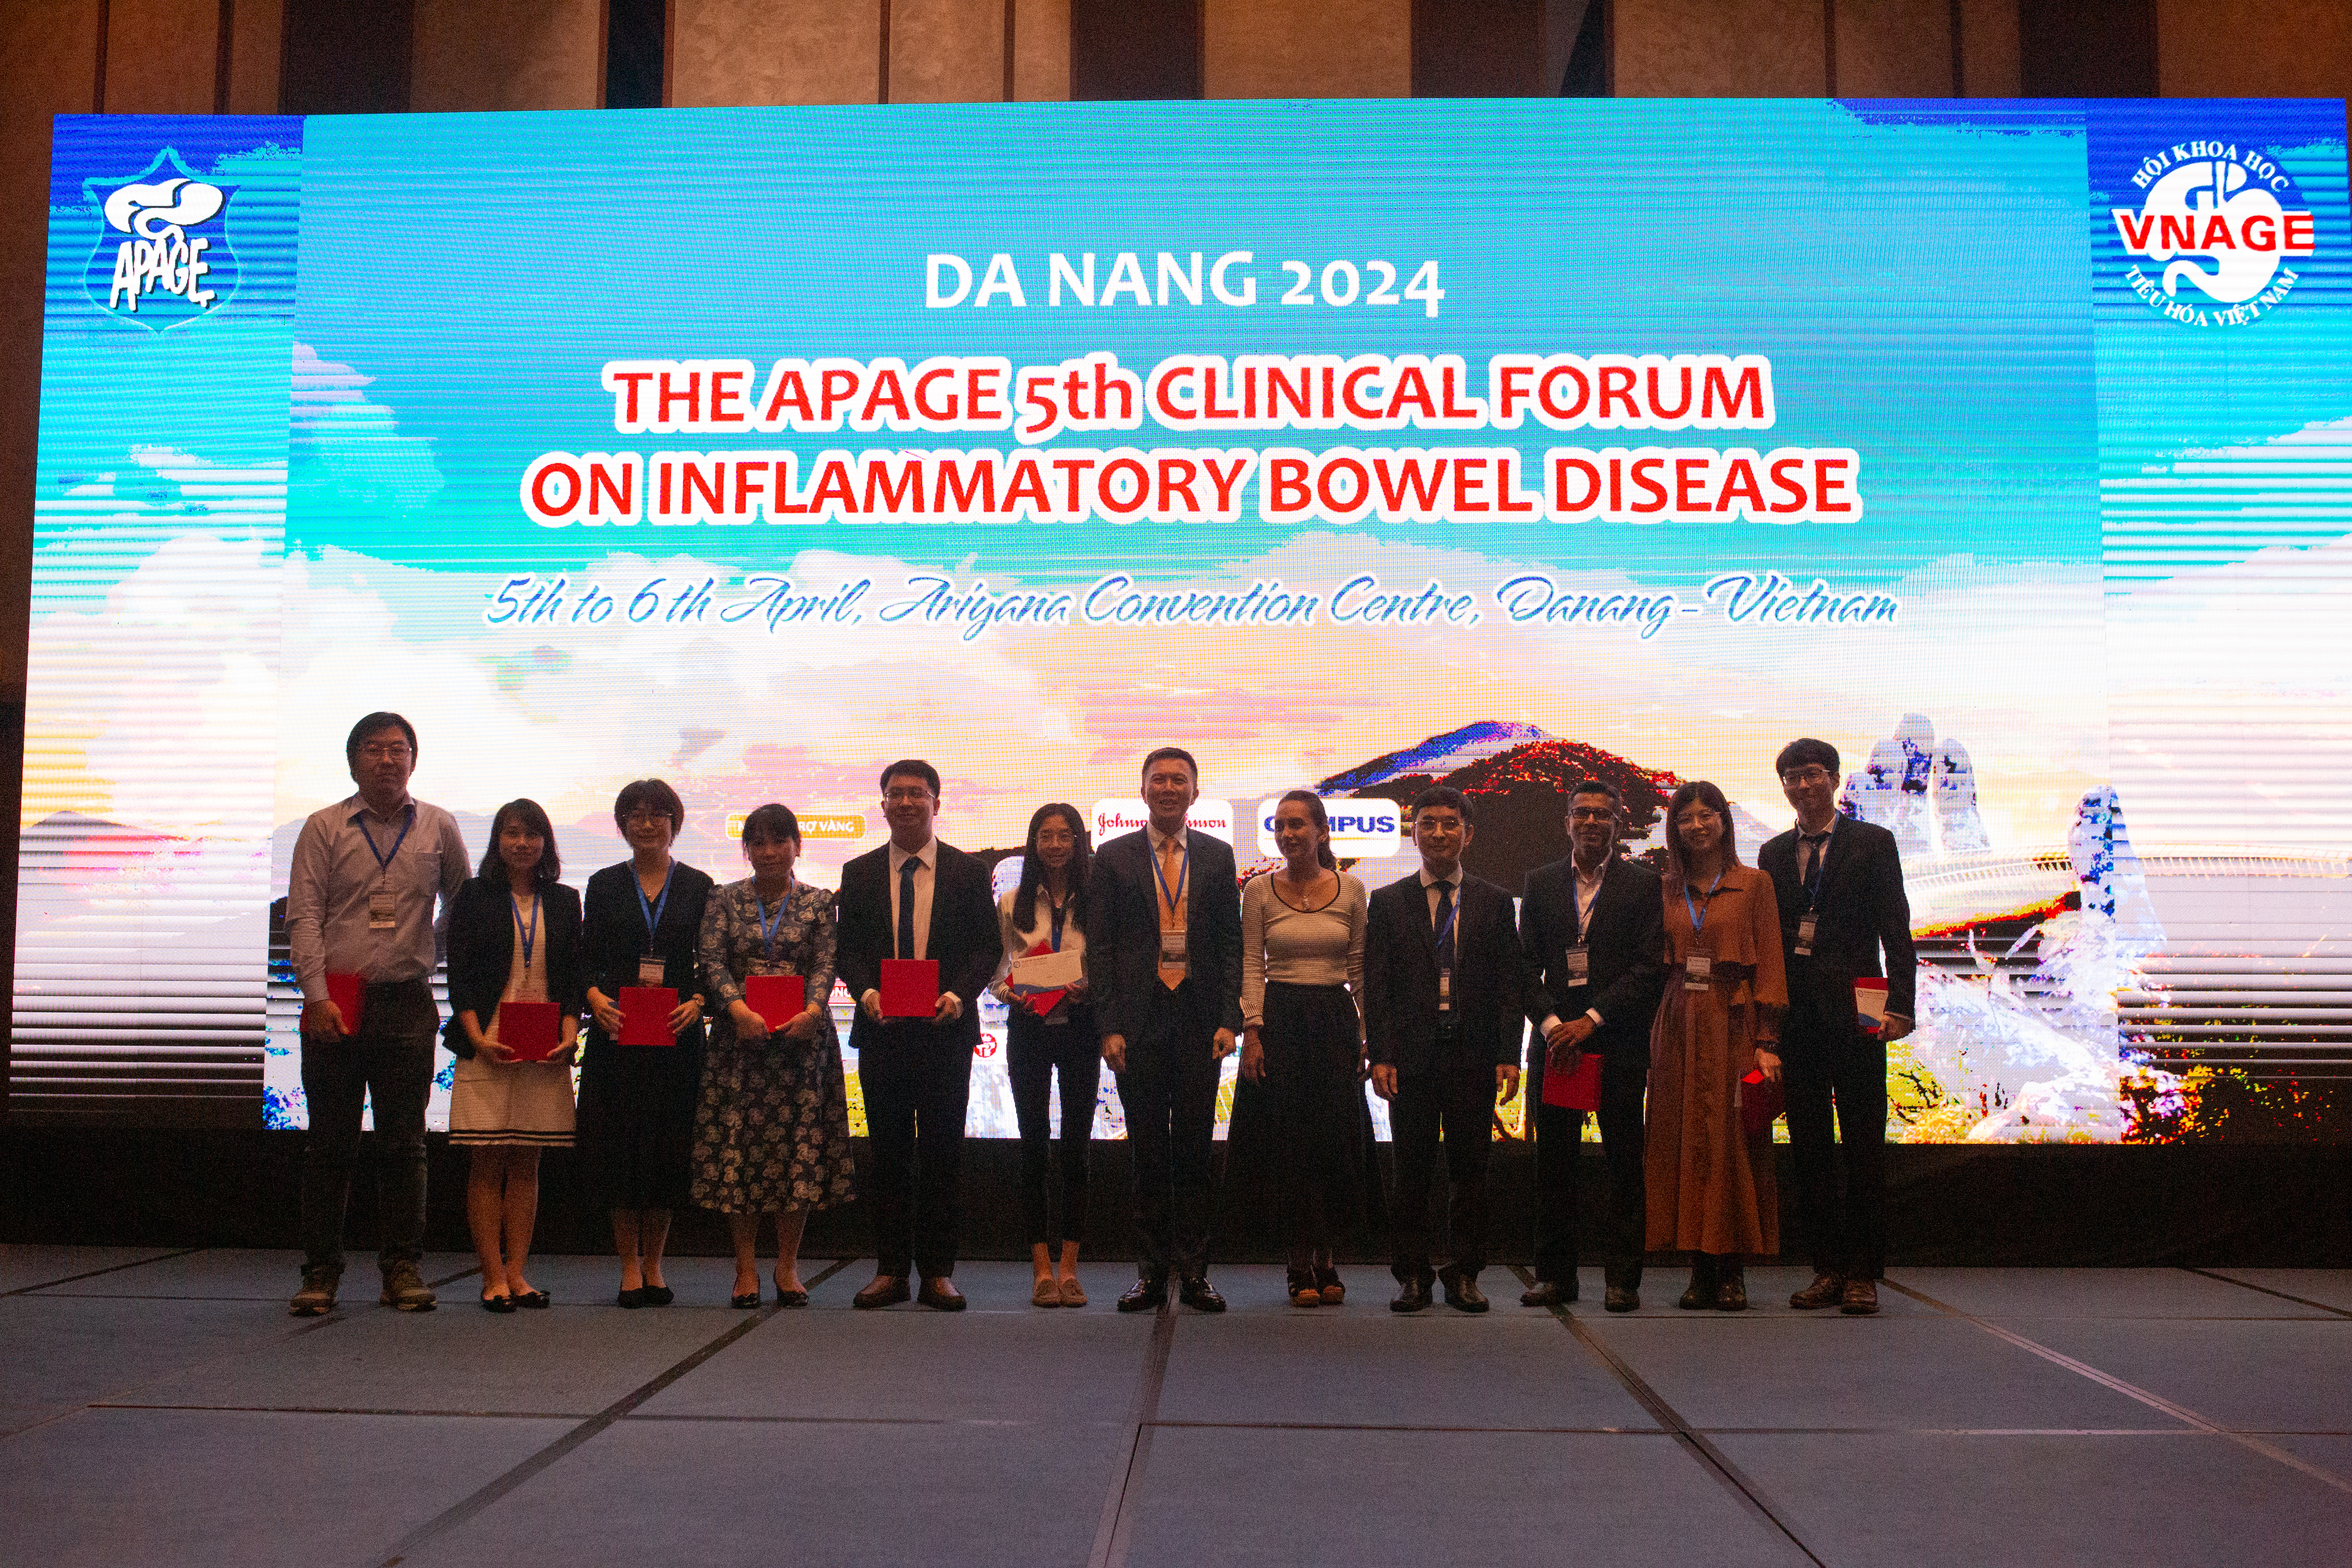 APAGE 5TH CLINICAL FORUM ON INFLAMMATORY BOWEL DISEASE